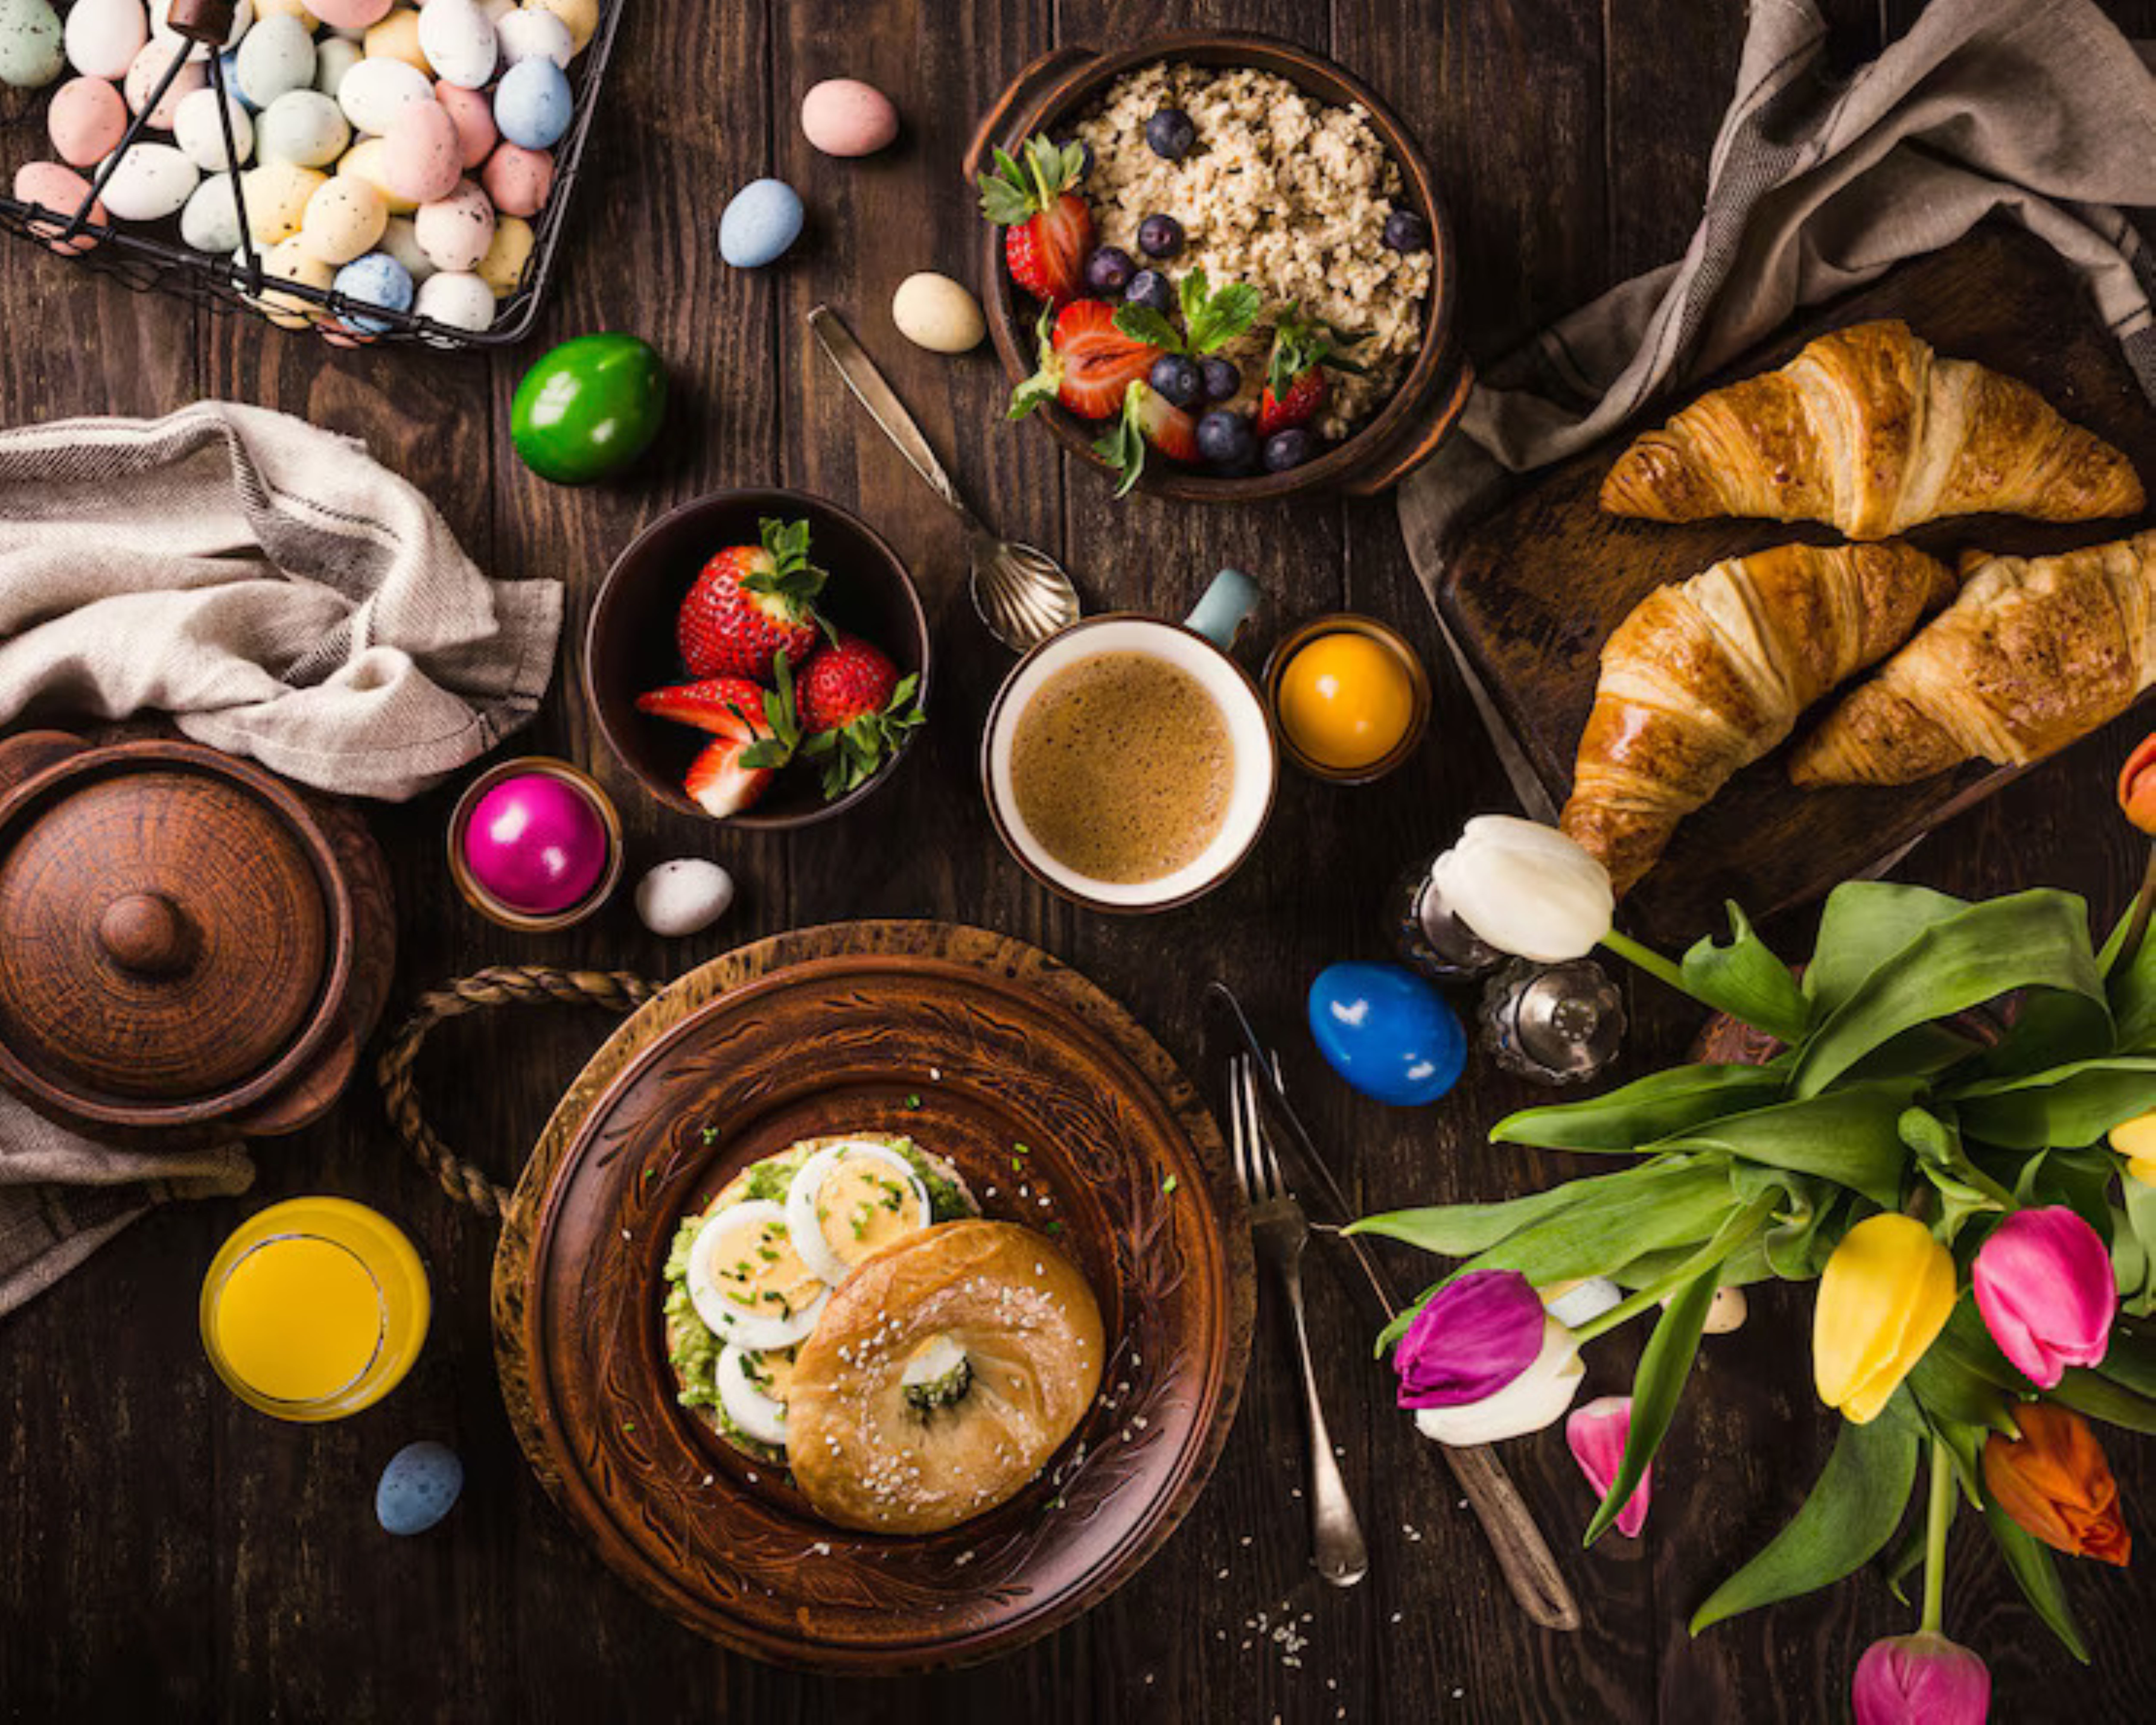 Courtyard by Marriott Bengaluru Outer Ring Road Presents an Egg-licious Easter Brunch at Momo Cafe   